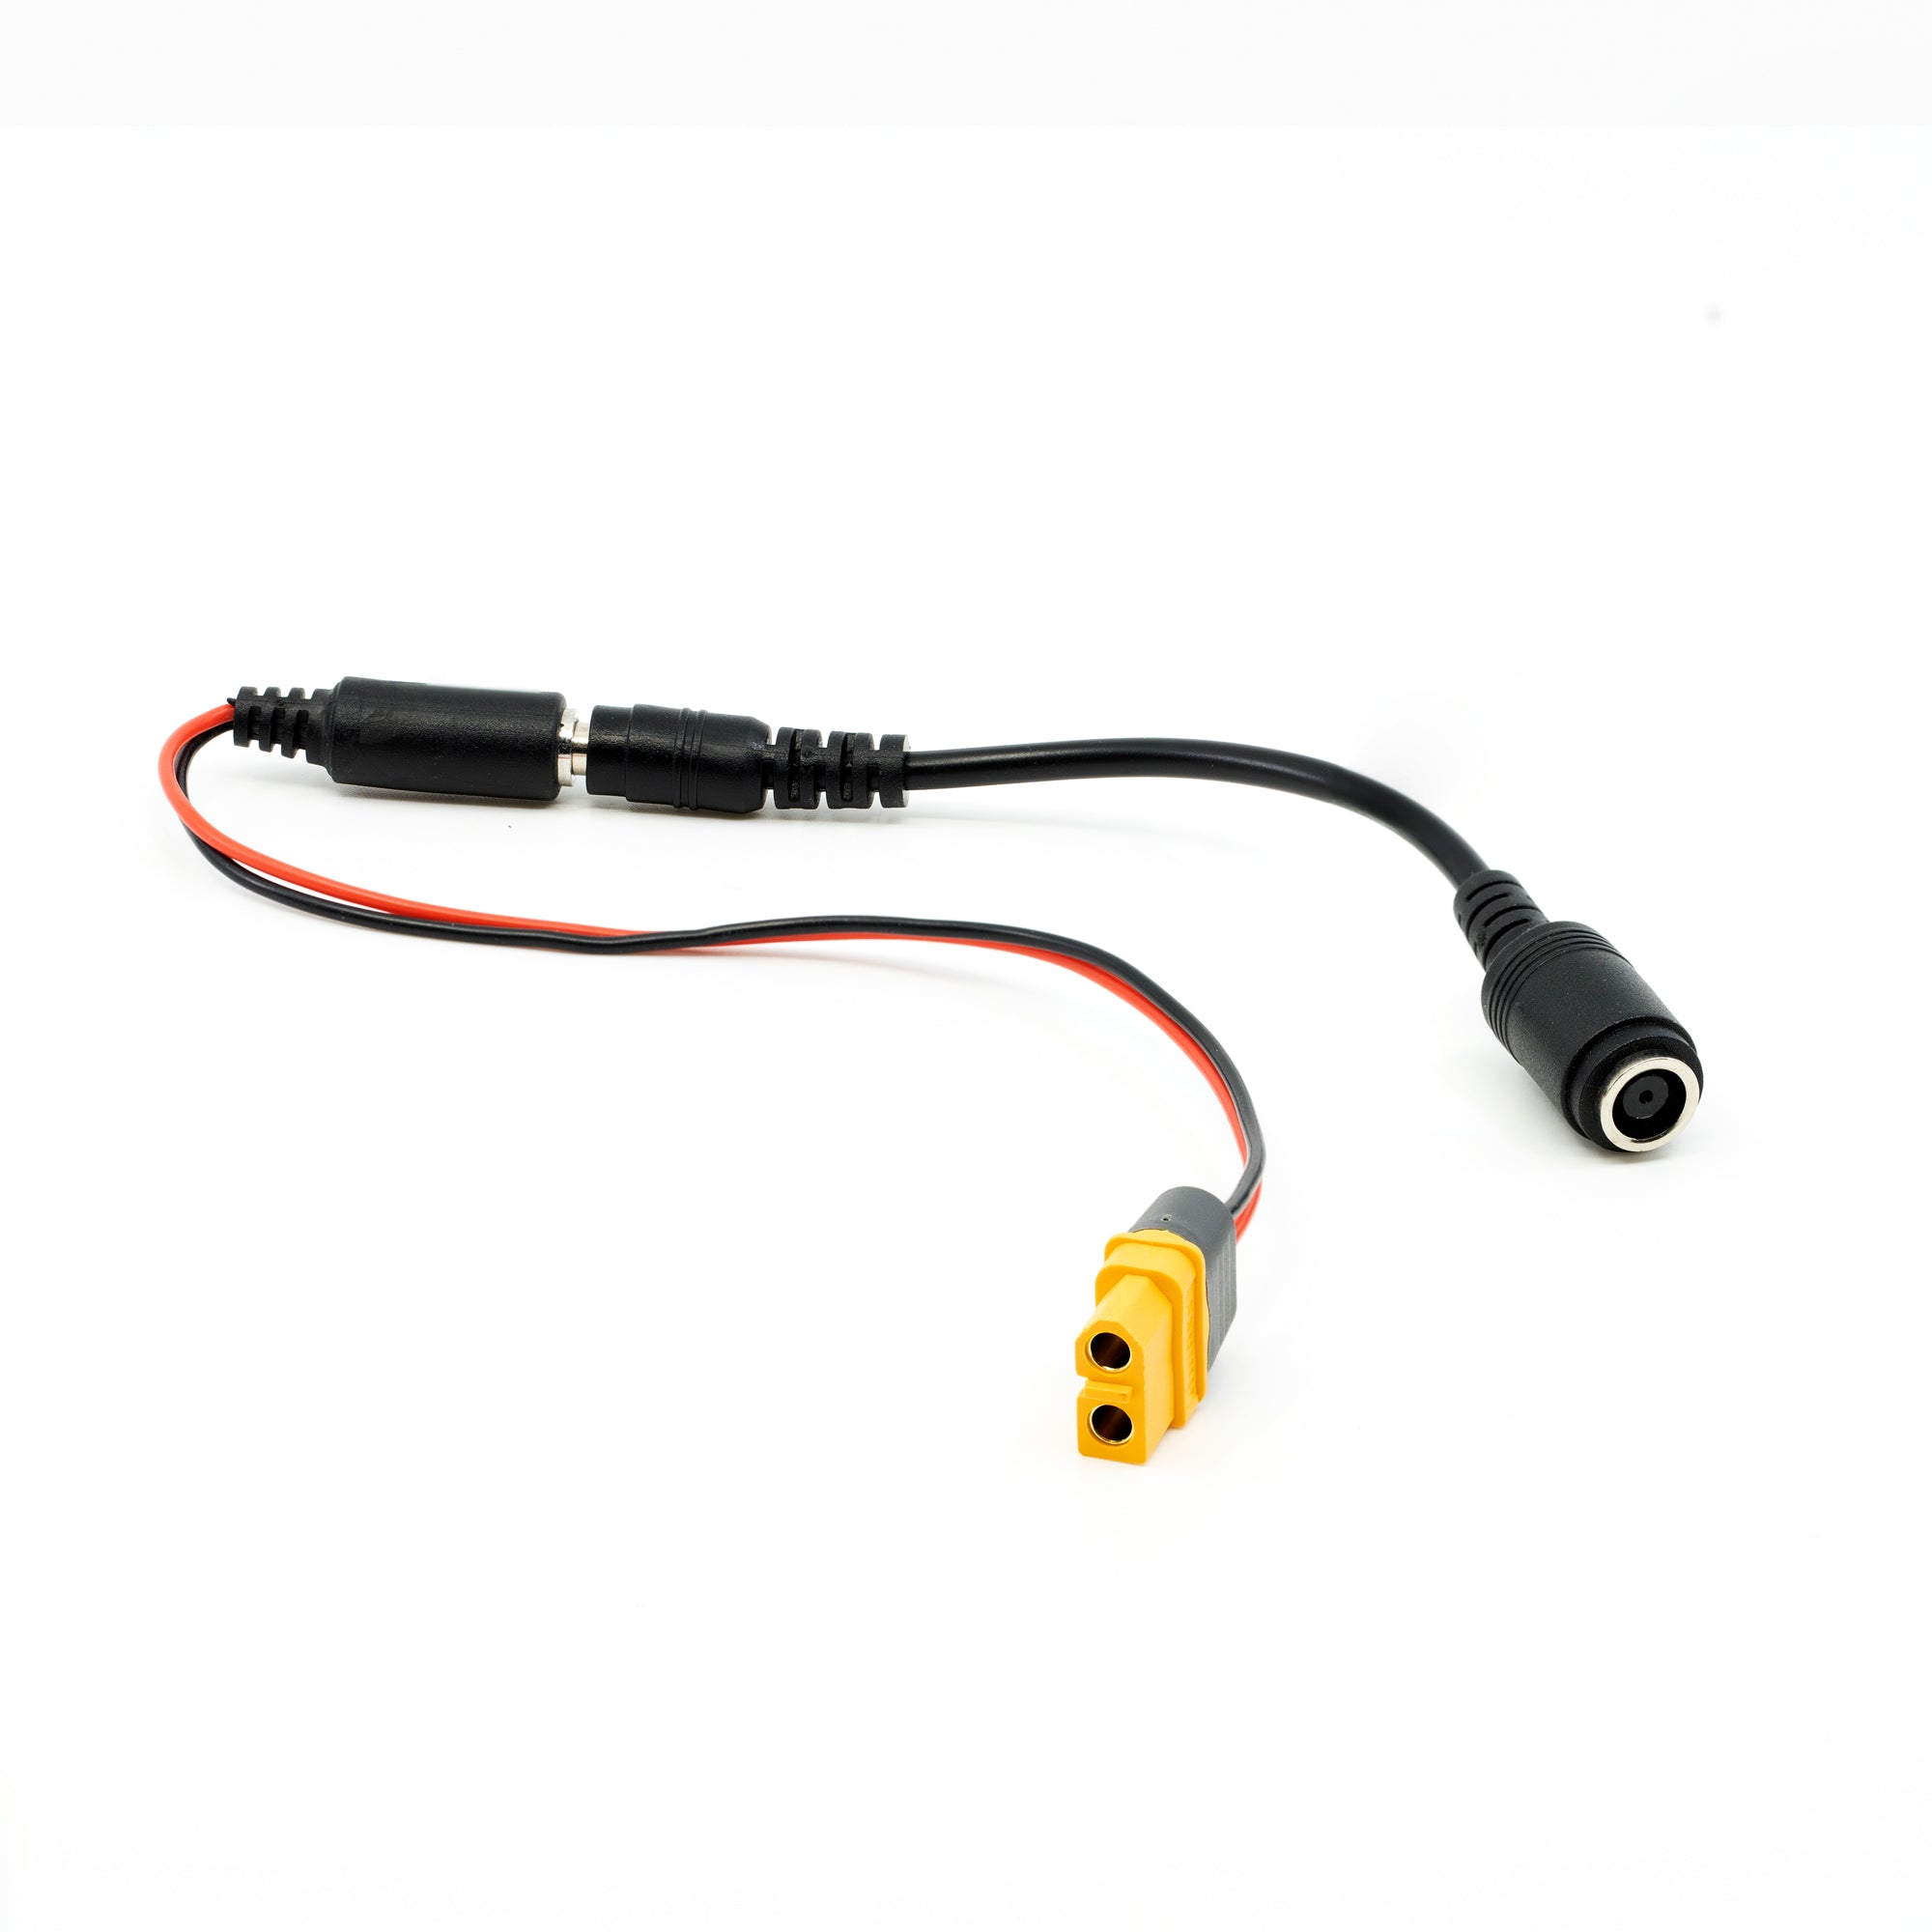 AC to DC 19.5v 11.8A 230W Refurbished Power Supply for Lipo Chargers with XT60 Cable Adapter